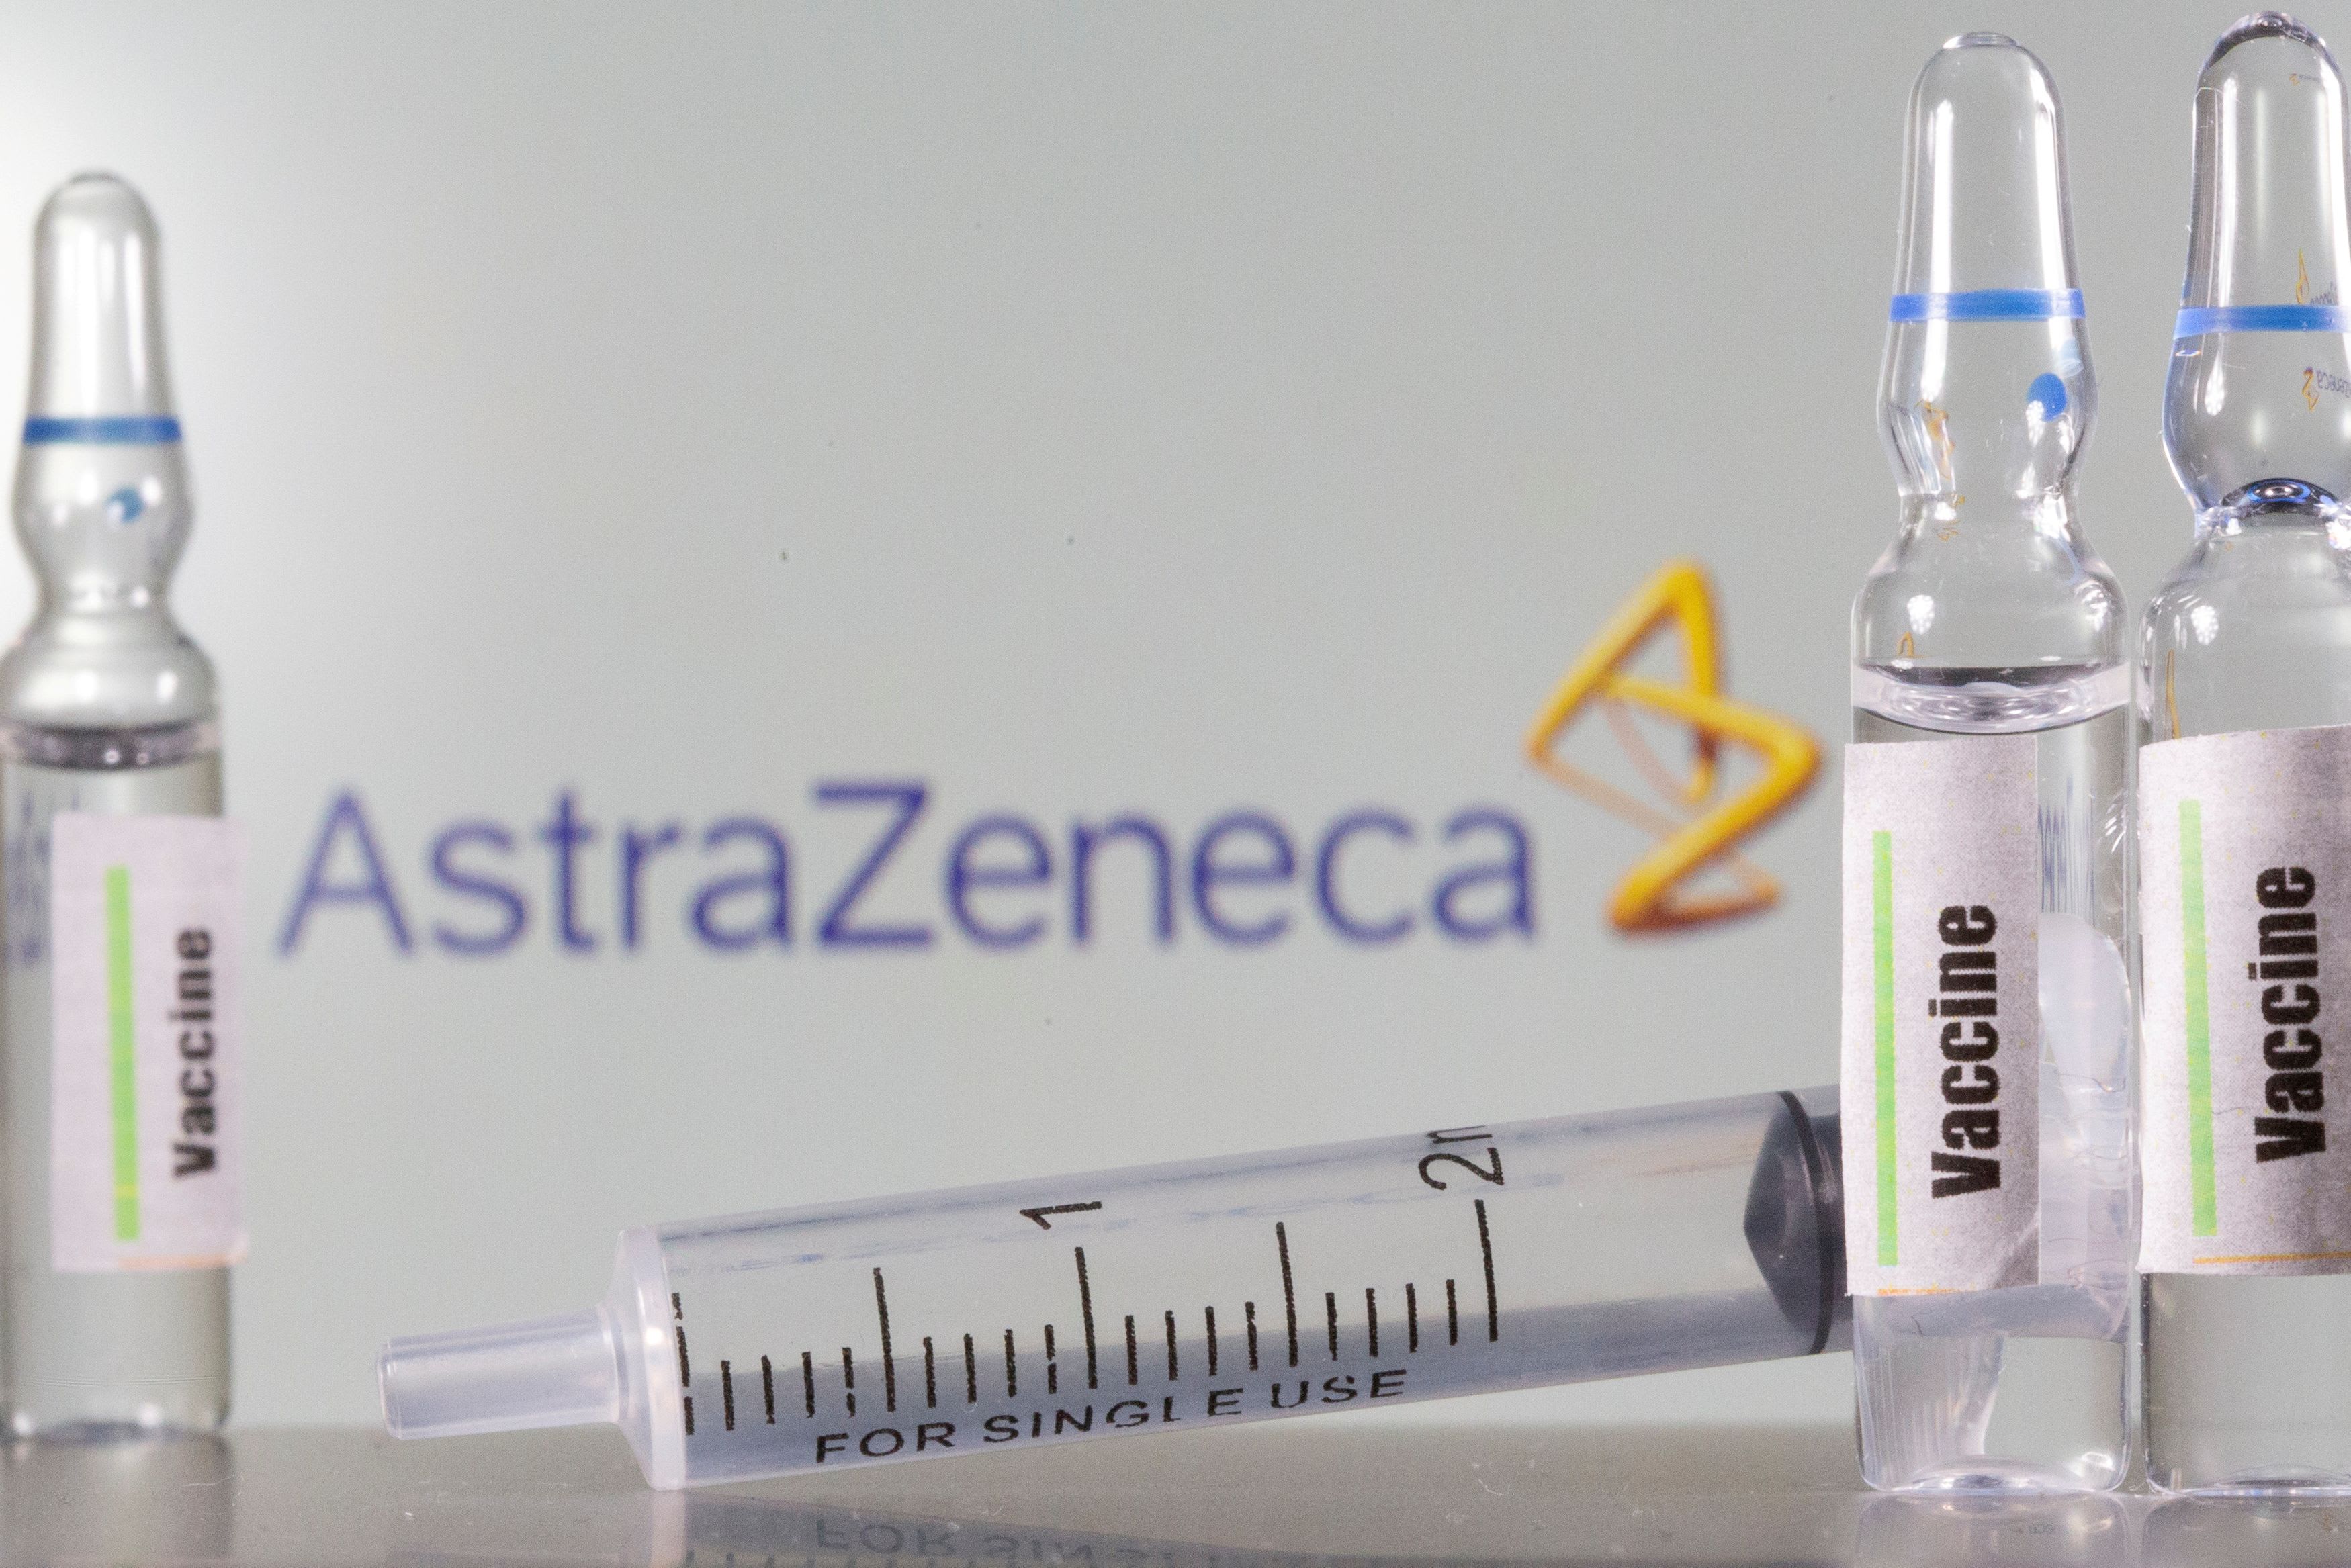 Oxford-AstraZeneca Covid vaccine is safe and effective, researchers